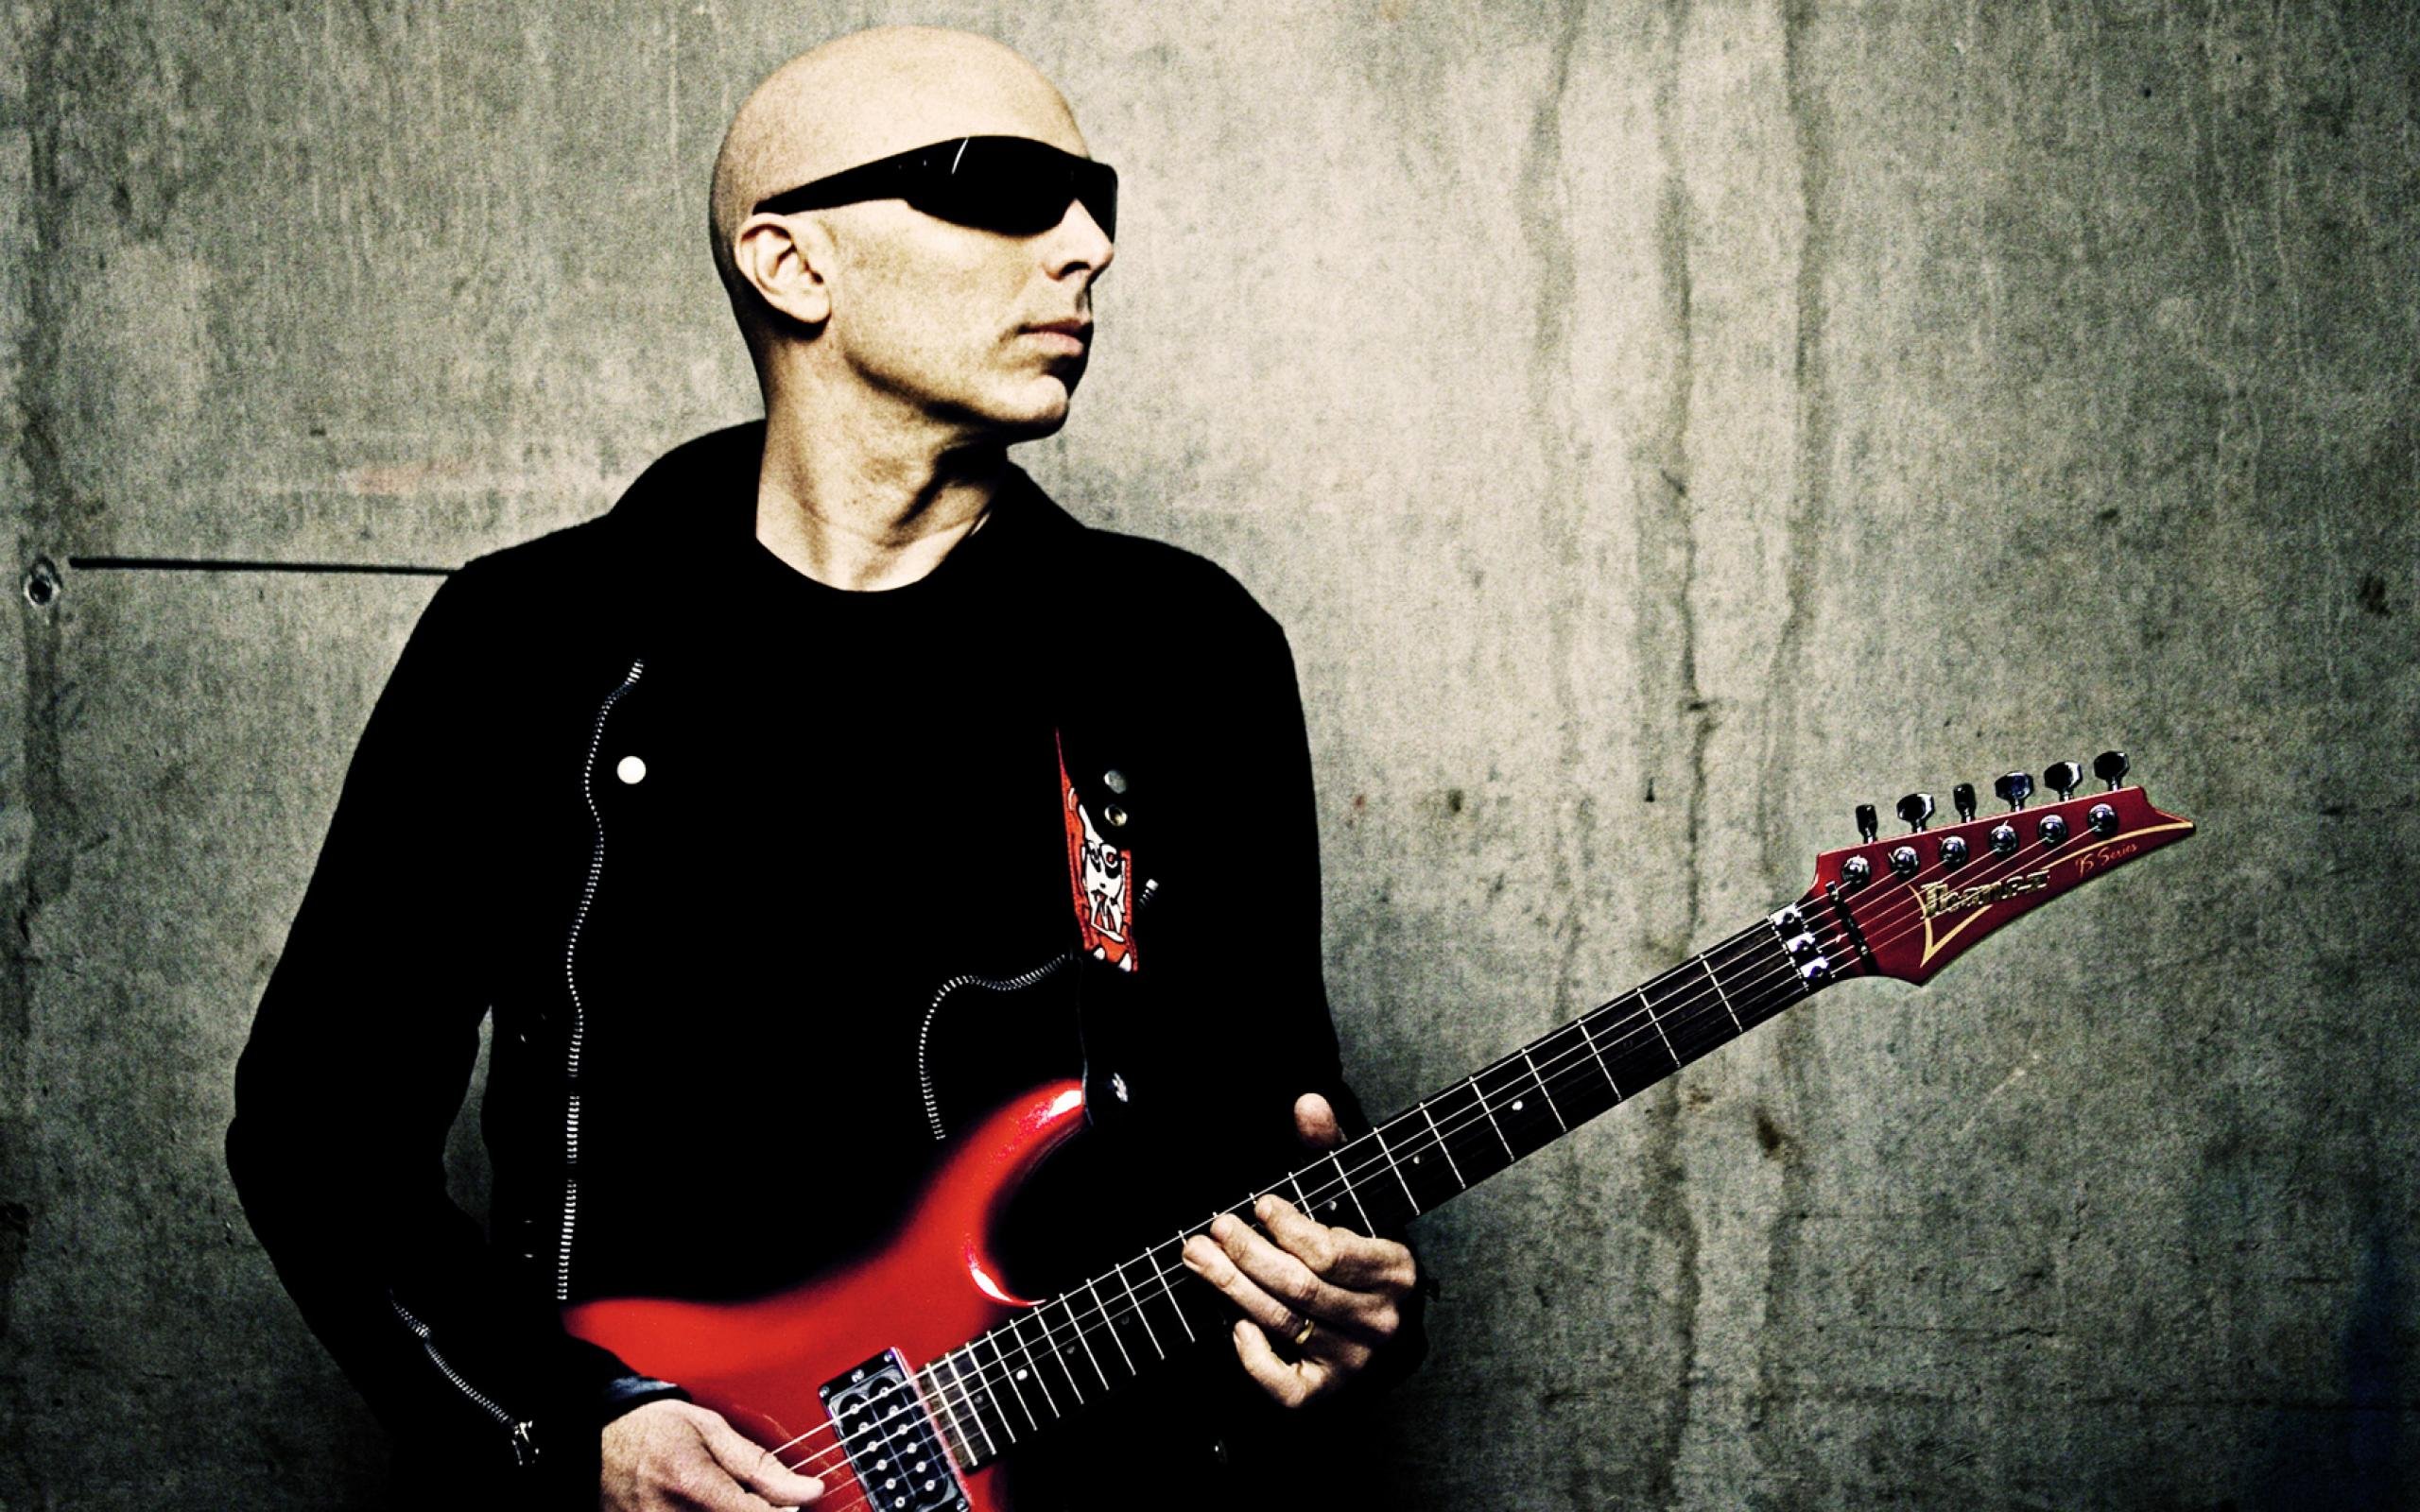 Joe Satriani reveals two new albums in the works